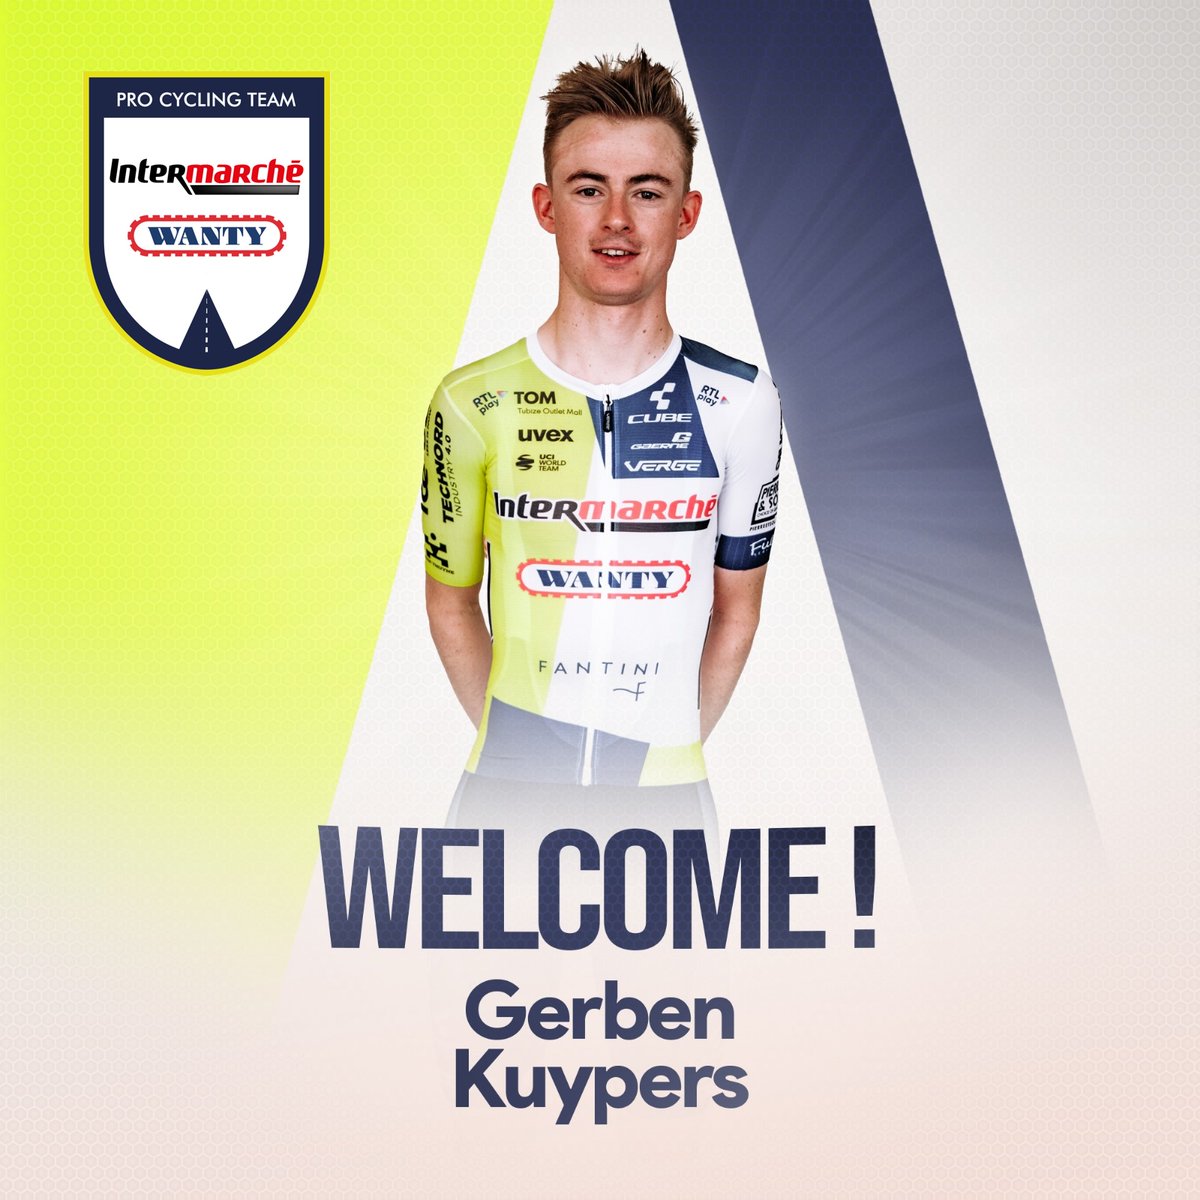 The dream of Gerben Kuypers is reality 🙌 He joins Intermarché-Wanty and makes his World Tour debut in Liège-Bastogne-Liège 🤩 More ➡ intermarche-wanty.eu/news/kuypers-w… #LBL